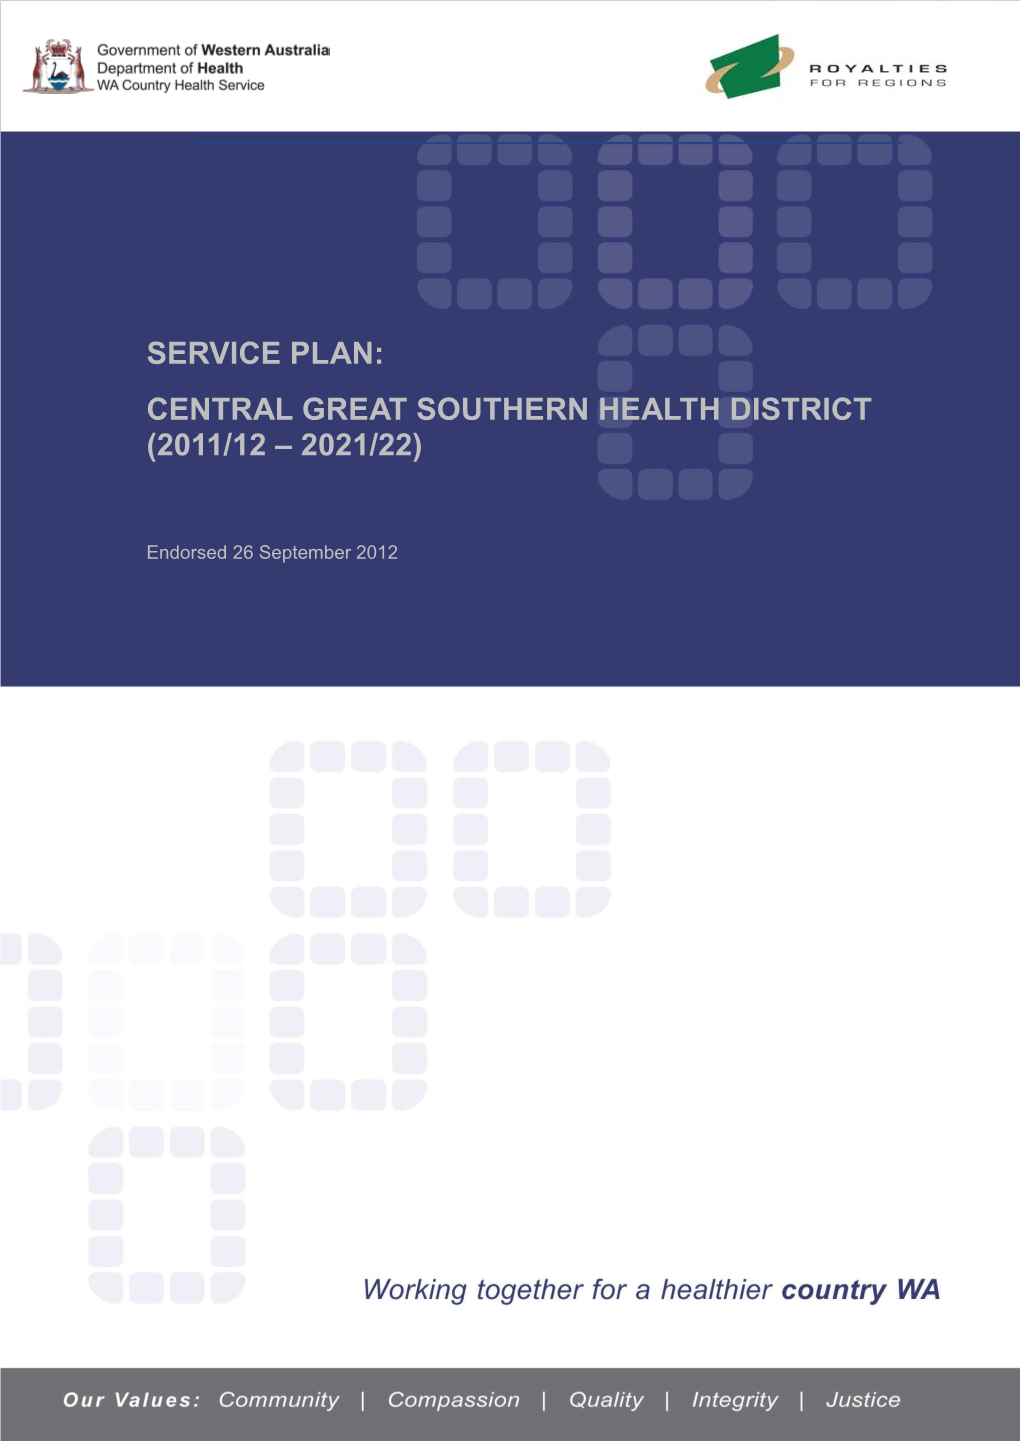 Service Plan: Central Great Southern Health District (2011/12 – 2021/22)